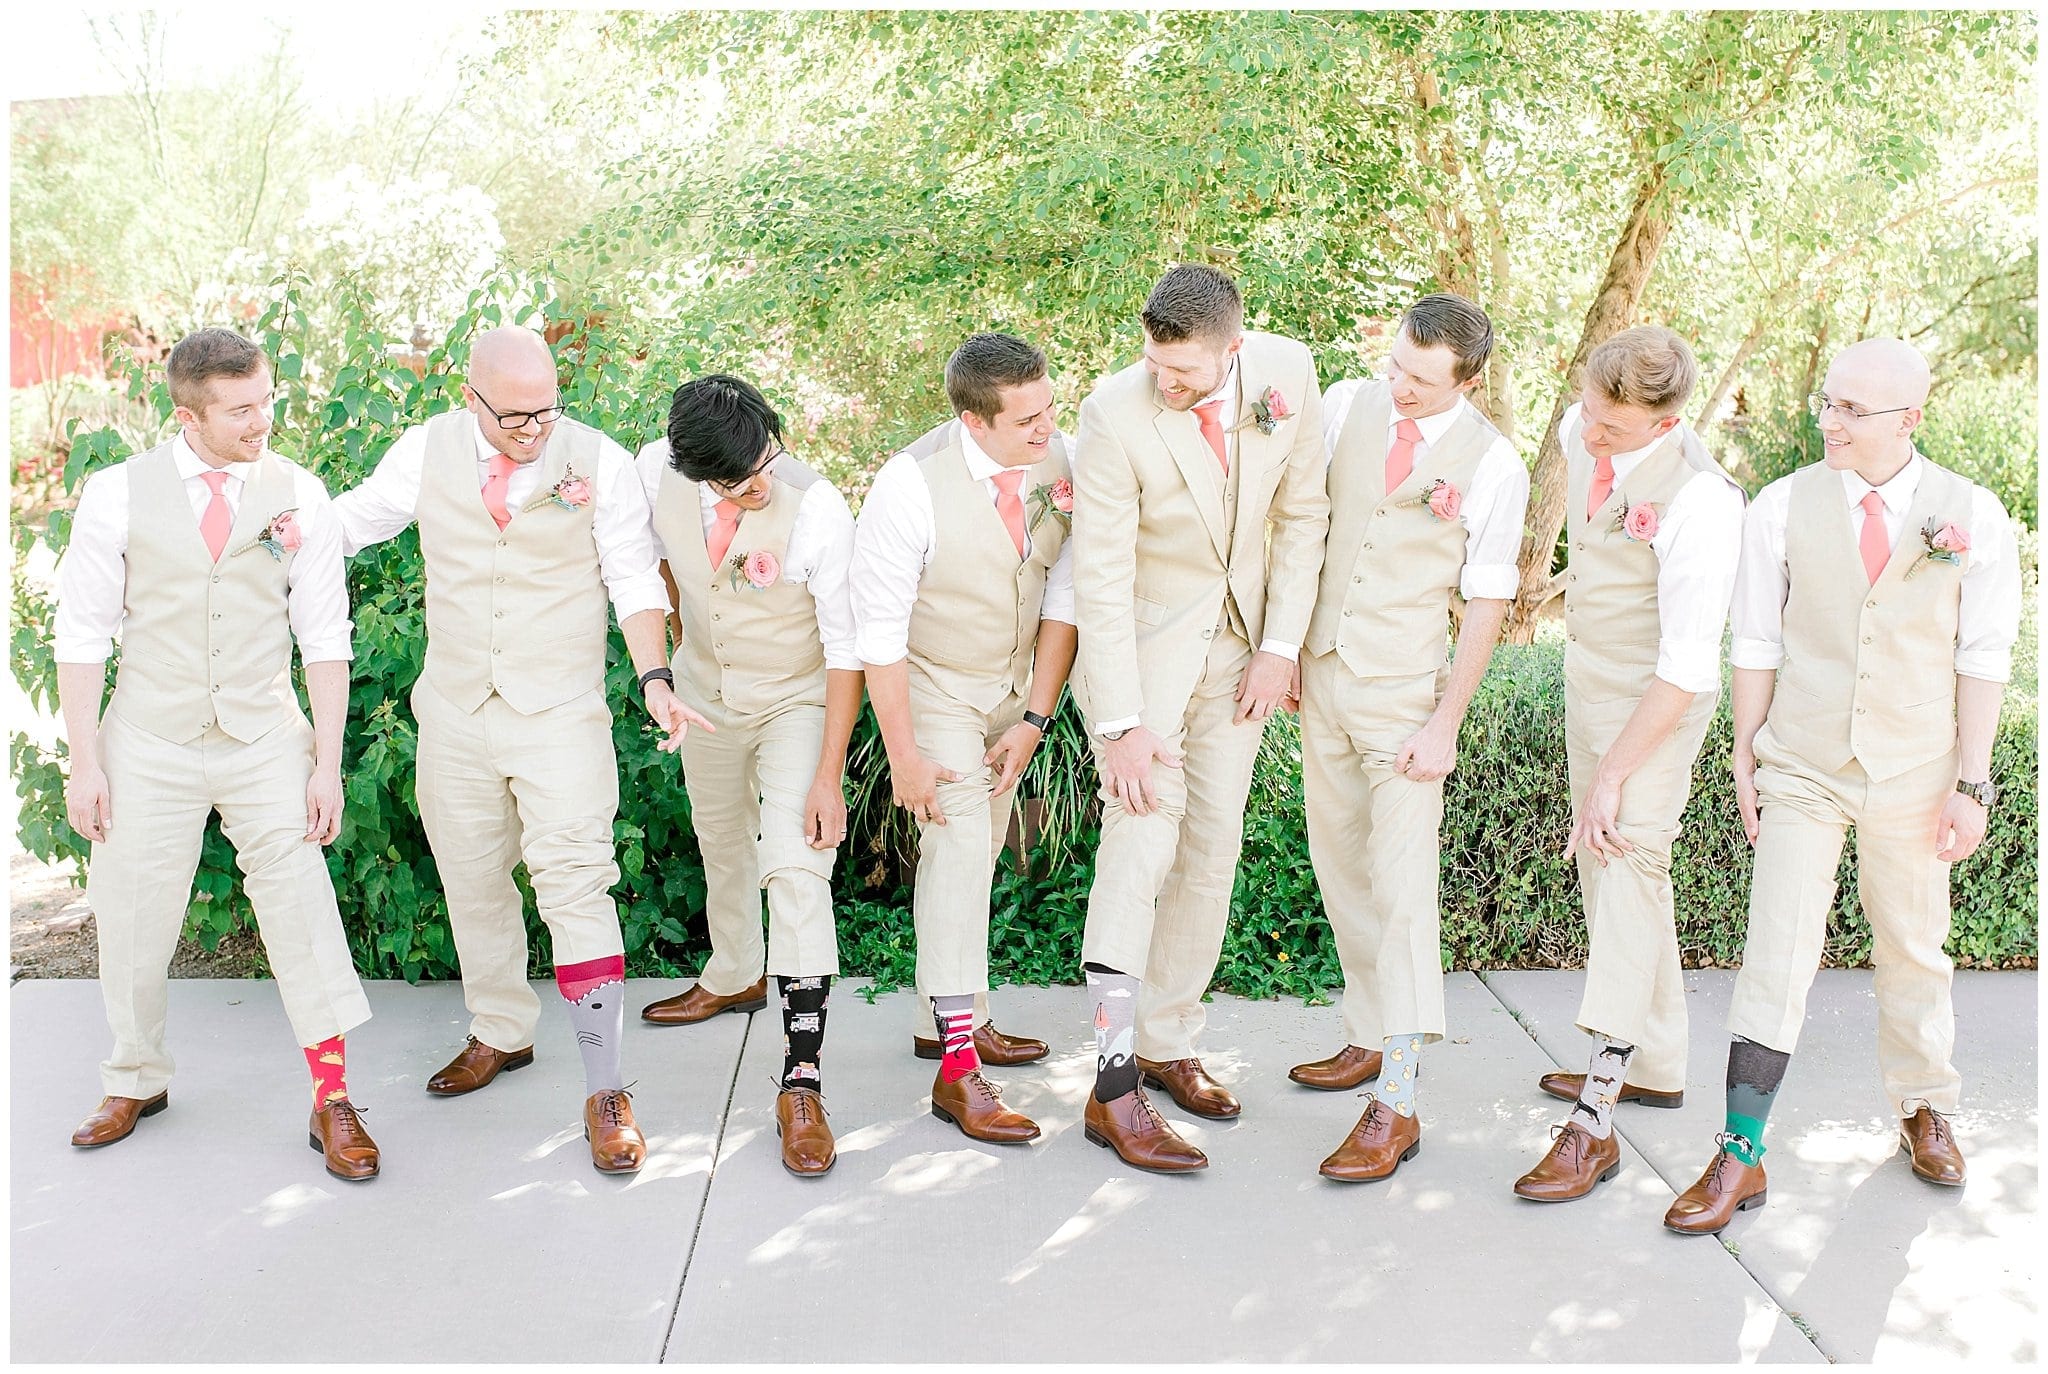 Groomsmen Pictures, windmill winery, tan suits, brown shoes